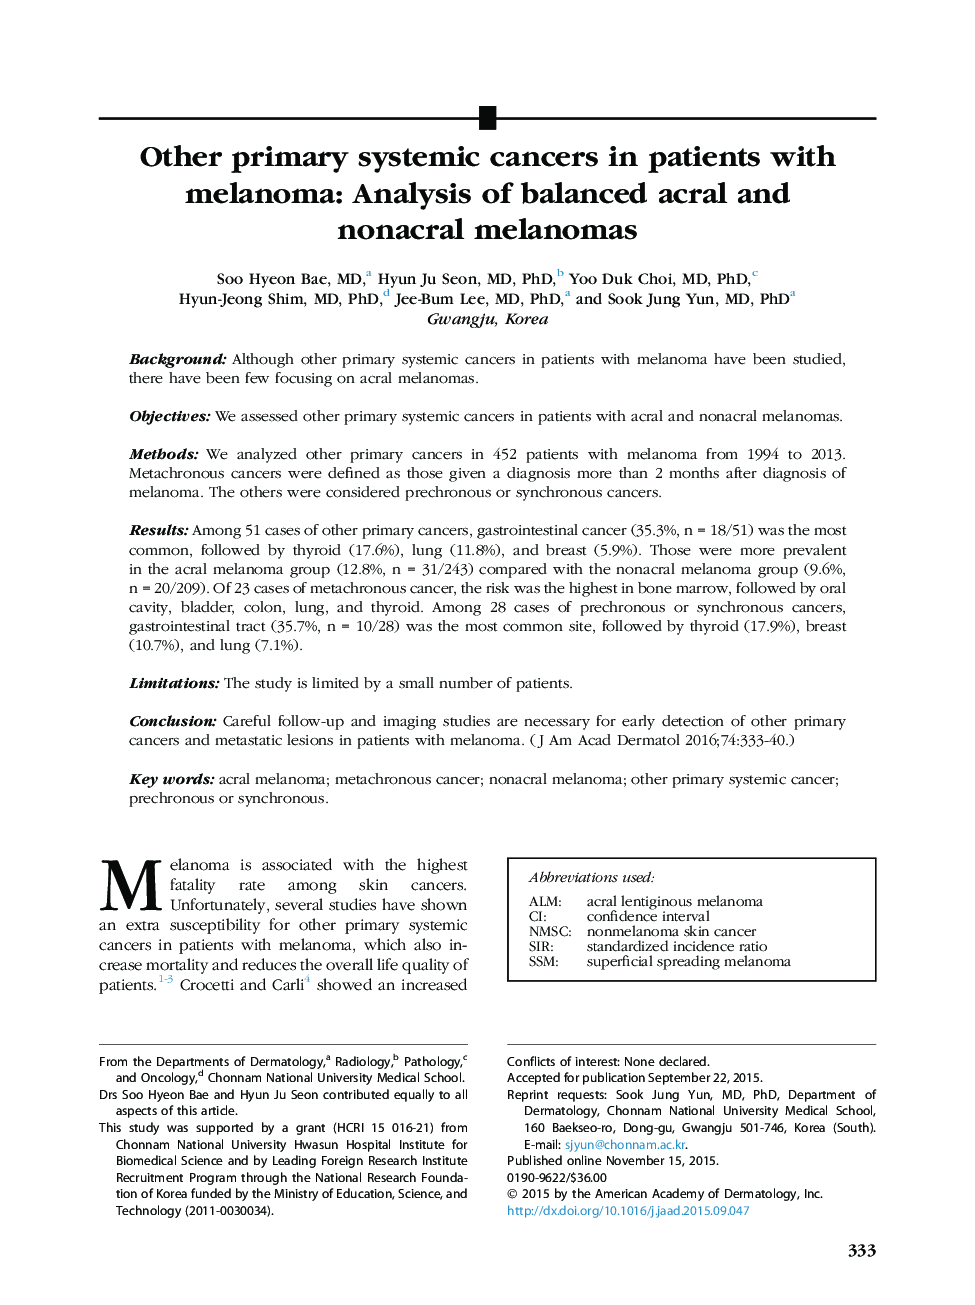 Original articleOther primary systemic cancers in patients with melanoma: Analysis of balanced acral and nonacral melanomas